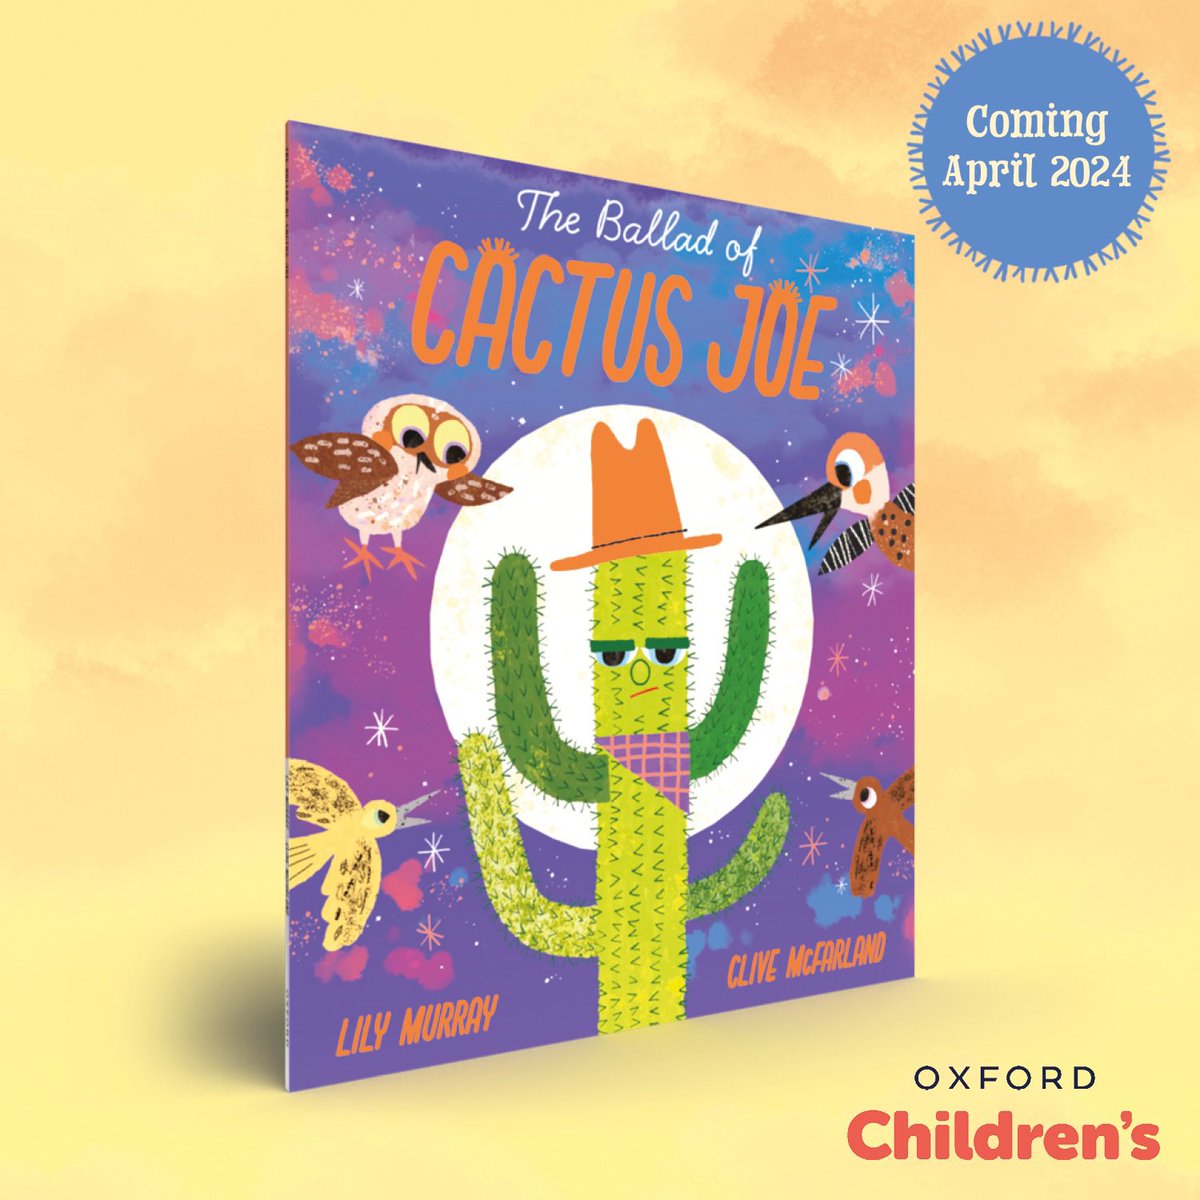 Cover reveal for 'The Ballad of Cactus Joe'! A rhyming tale of a cactus who just wants to be left alone... or does he? Teamed up with the amazing @lilymurraybooks for this one. Out April 2024 with @oxfordchildrens 🌵✨ @booksellingi #IrishBookWeek #DiscoverIrishKidsBooks